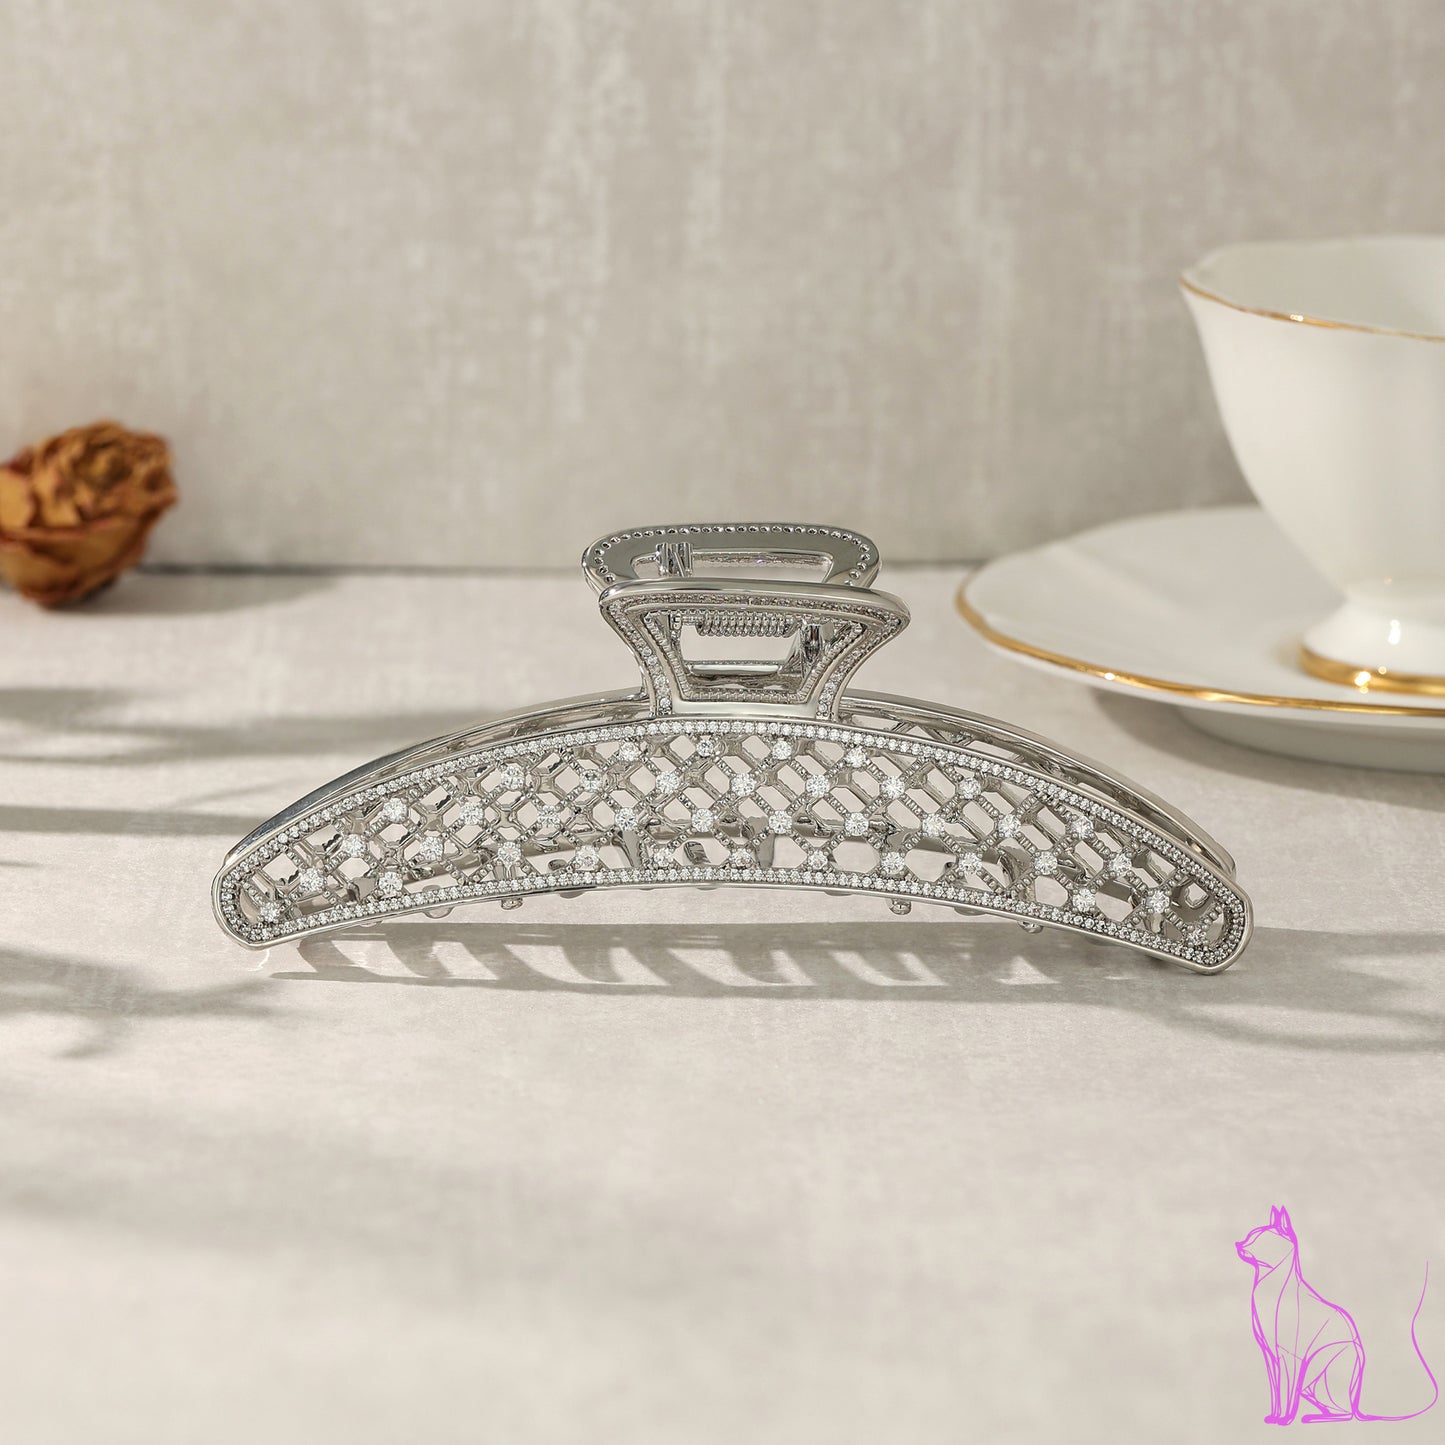 French designer's original design of light luxury and high-end, featuring a unique set of zircon hairpins and a shark clip for a female hairpin